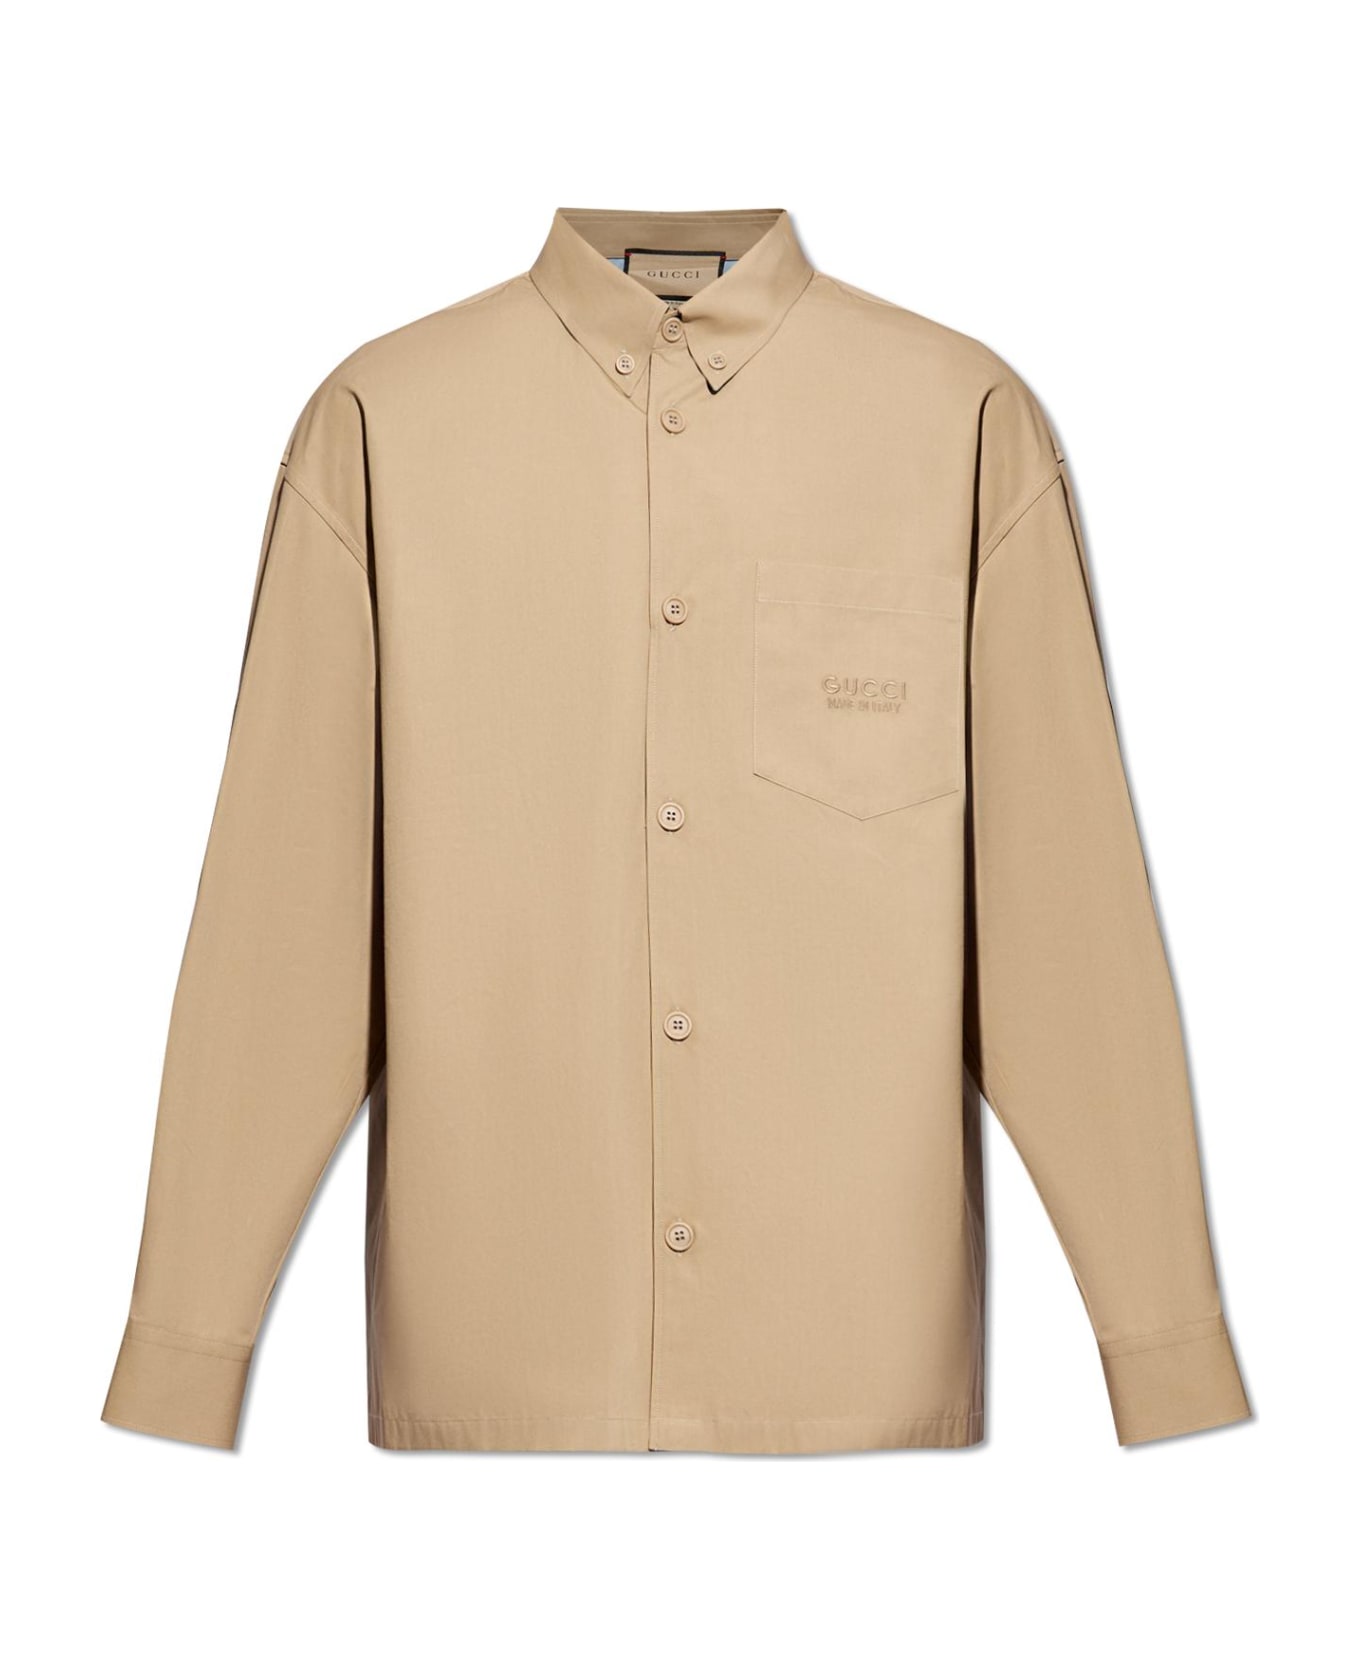 Gucci Cotton Shirt With Pocket - Beige